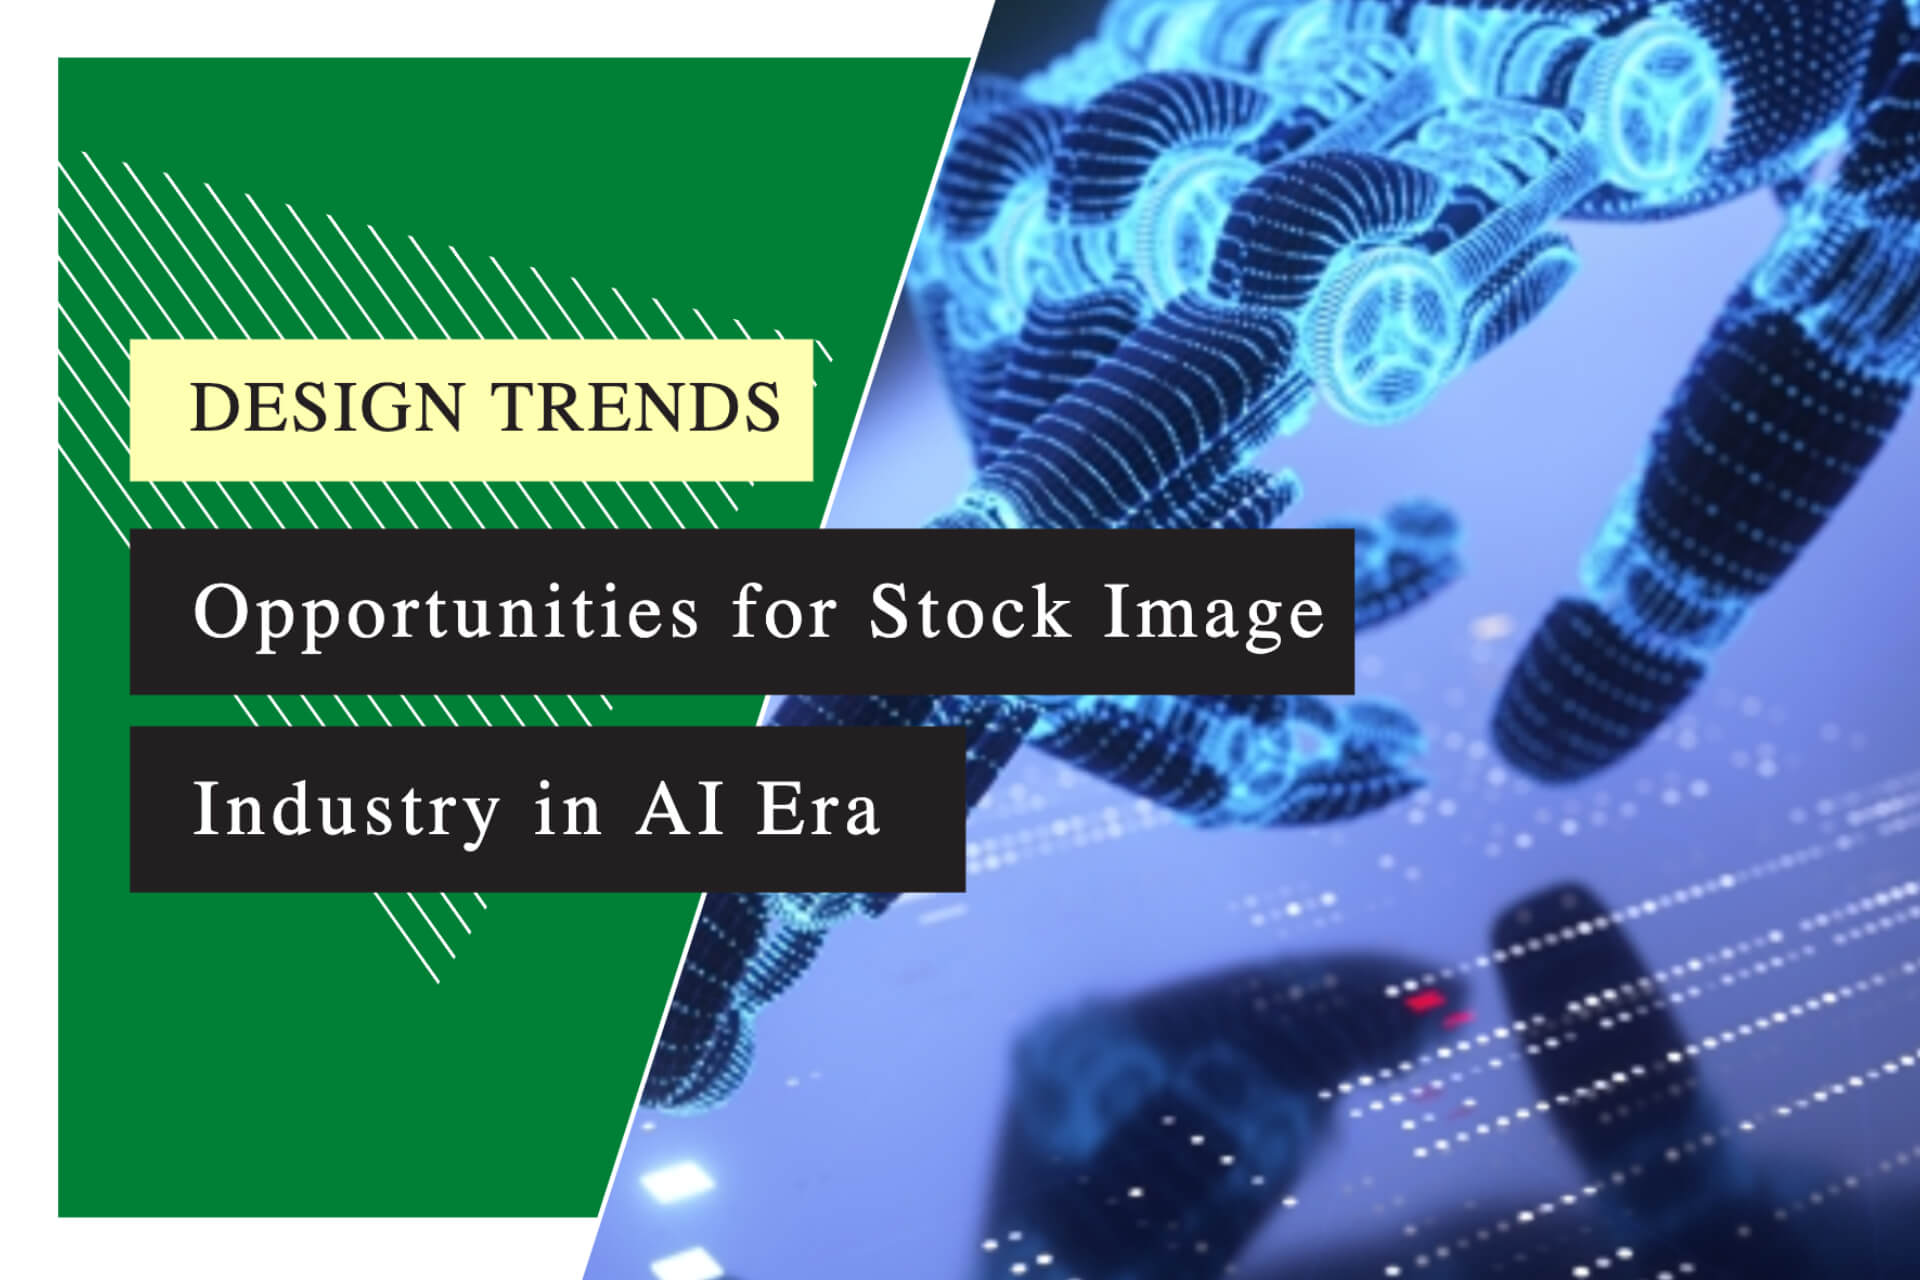 Opportunities for Stock Image Industry in AI Era